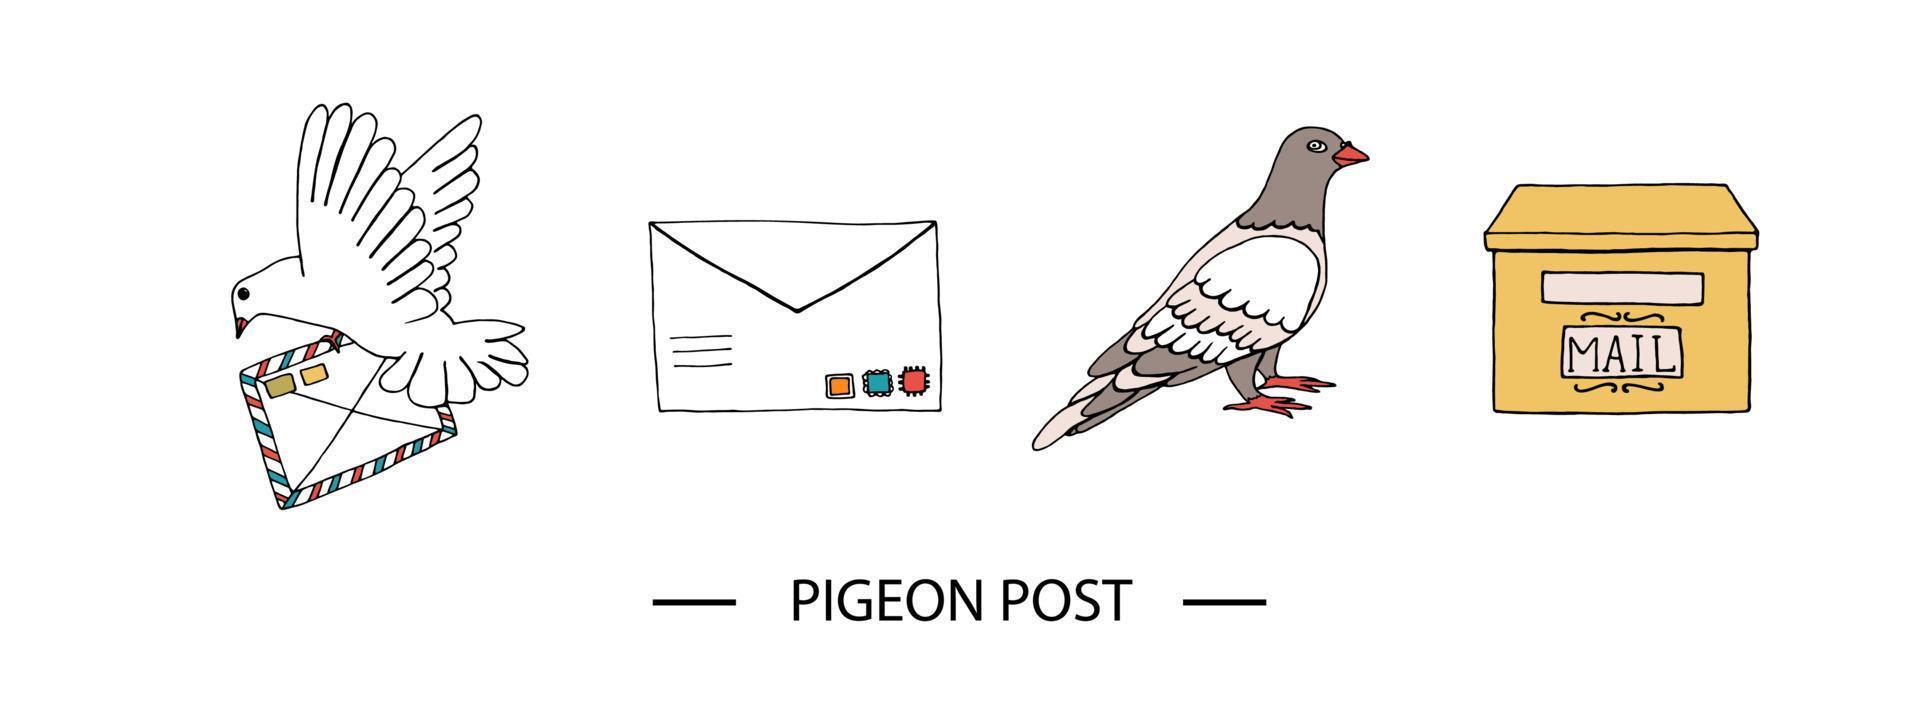 Vector illustration of pigeon carrying a letter with stamps, dove, post box. Hand drawn communication icon set. Pigeon post signs isolated on white background with text.